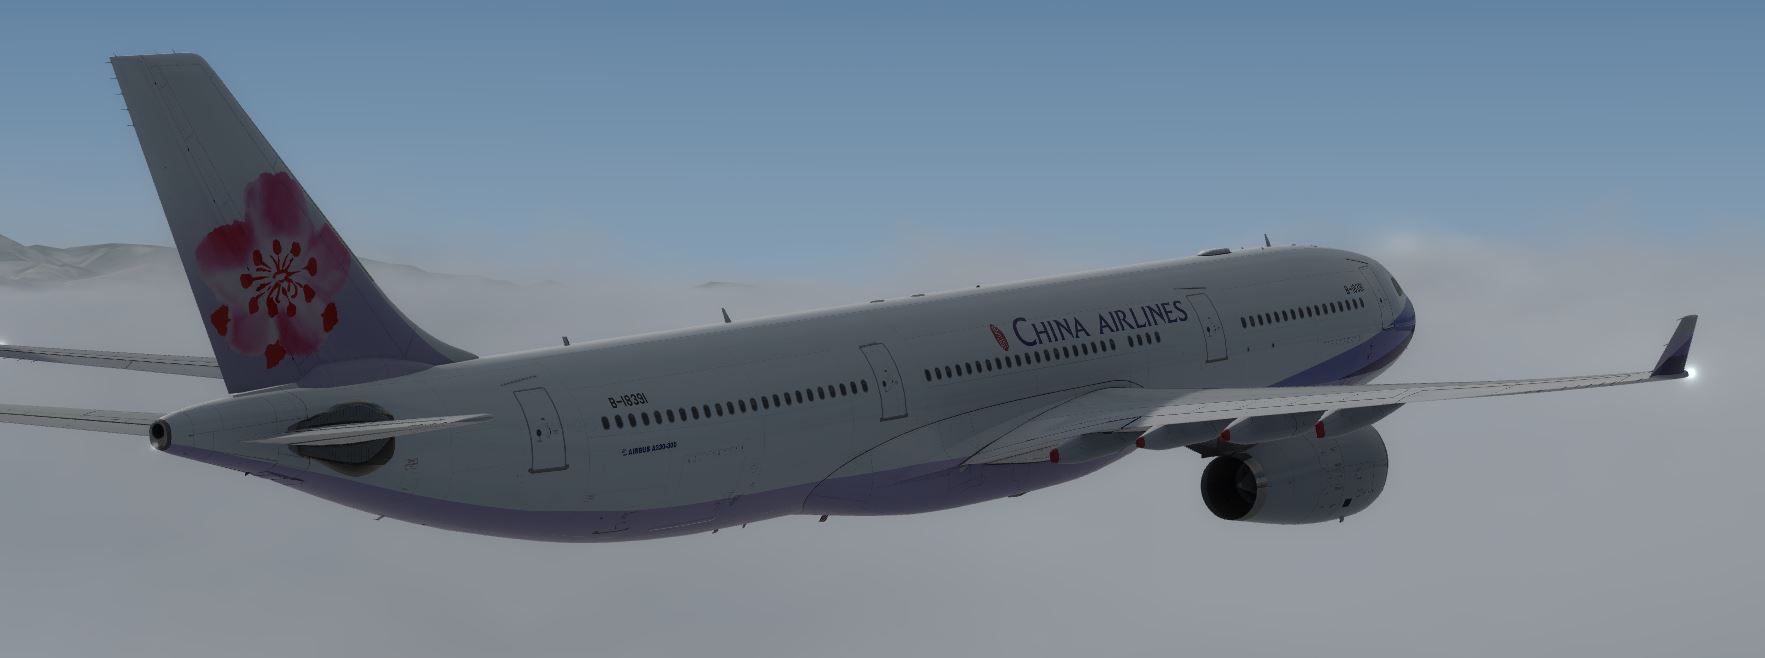 AS A330 ChinaAirline-2881 